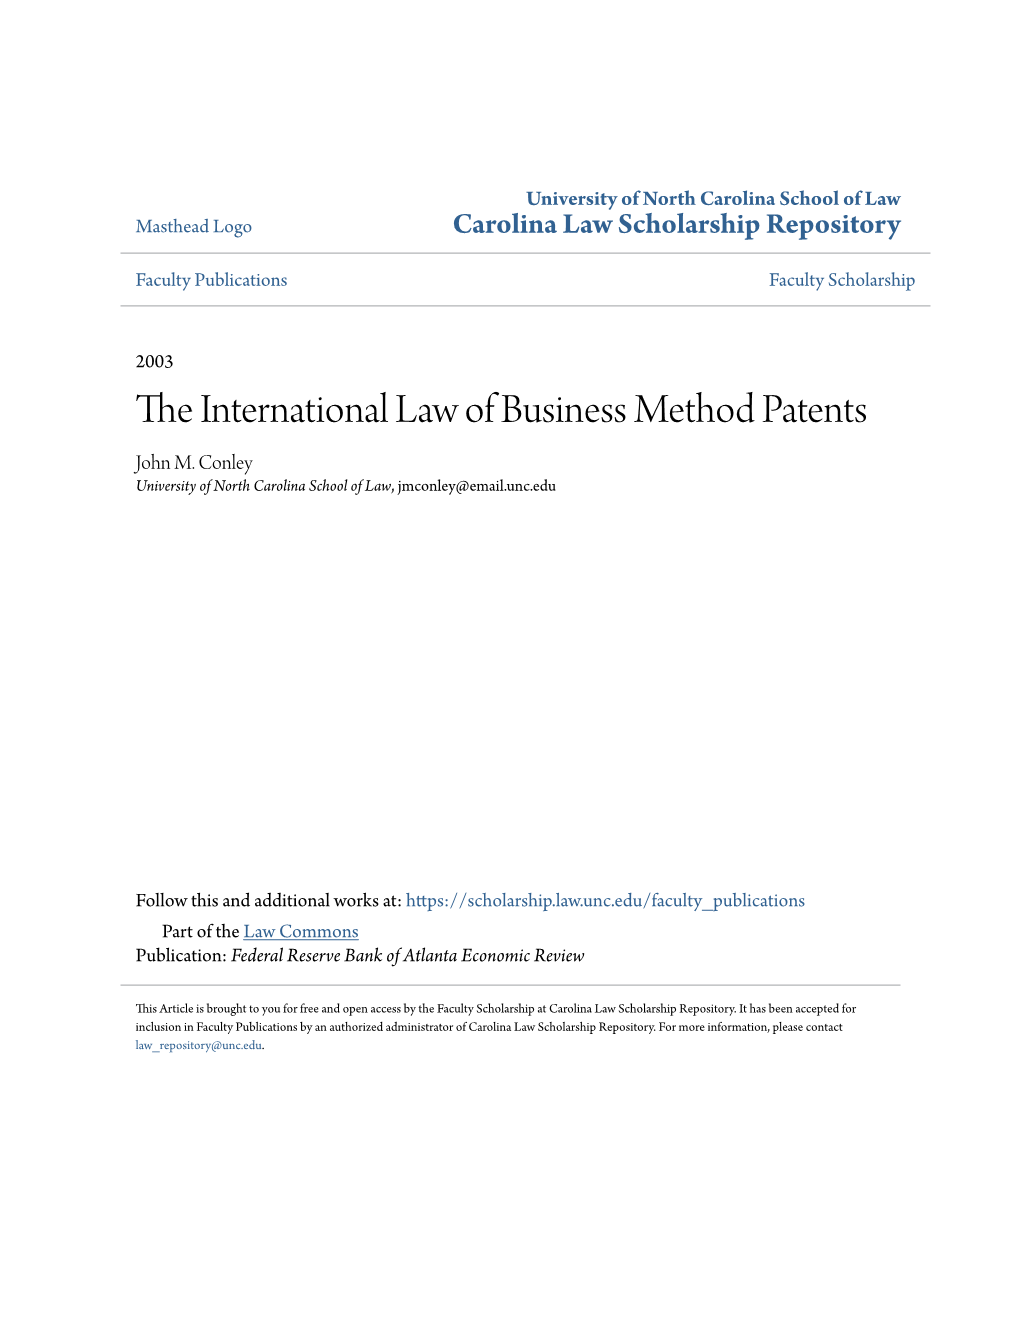 The International Law of Business Method Patents